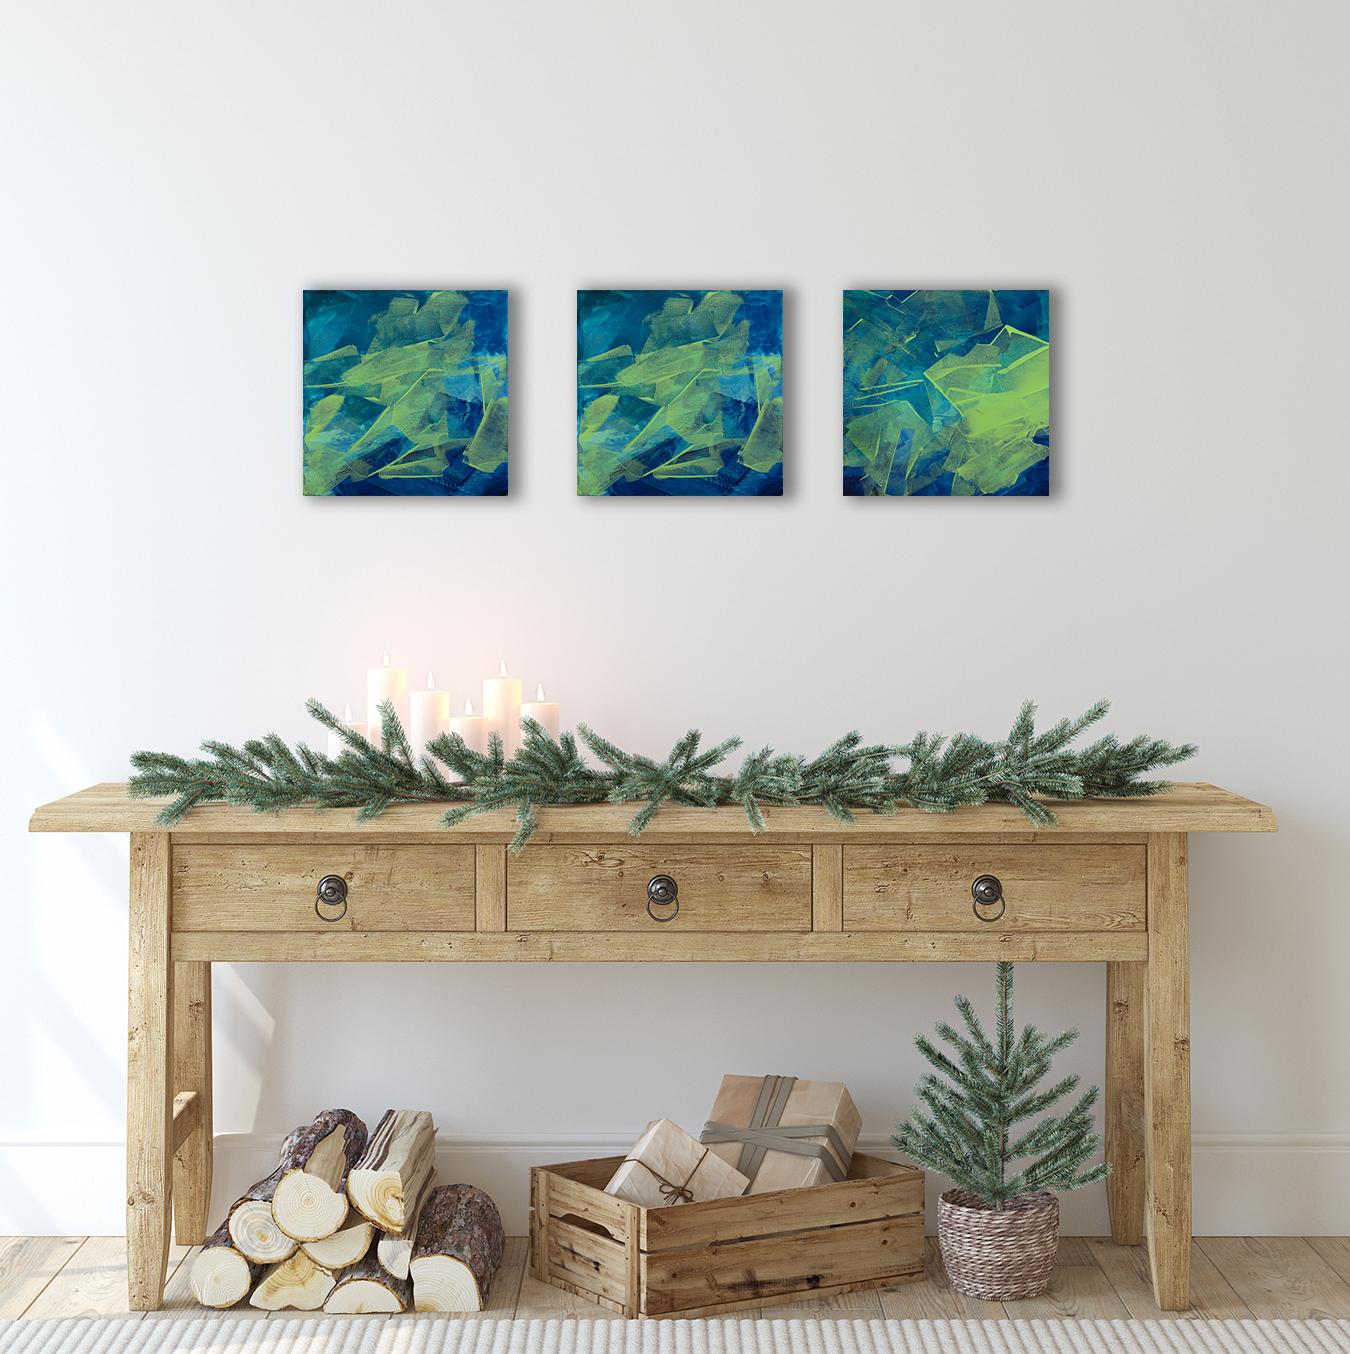 Teodora Guererra Abstract Painting - "Lime in the Coconut 1 - 3, " contemporary abstract oil painting mini series